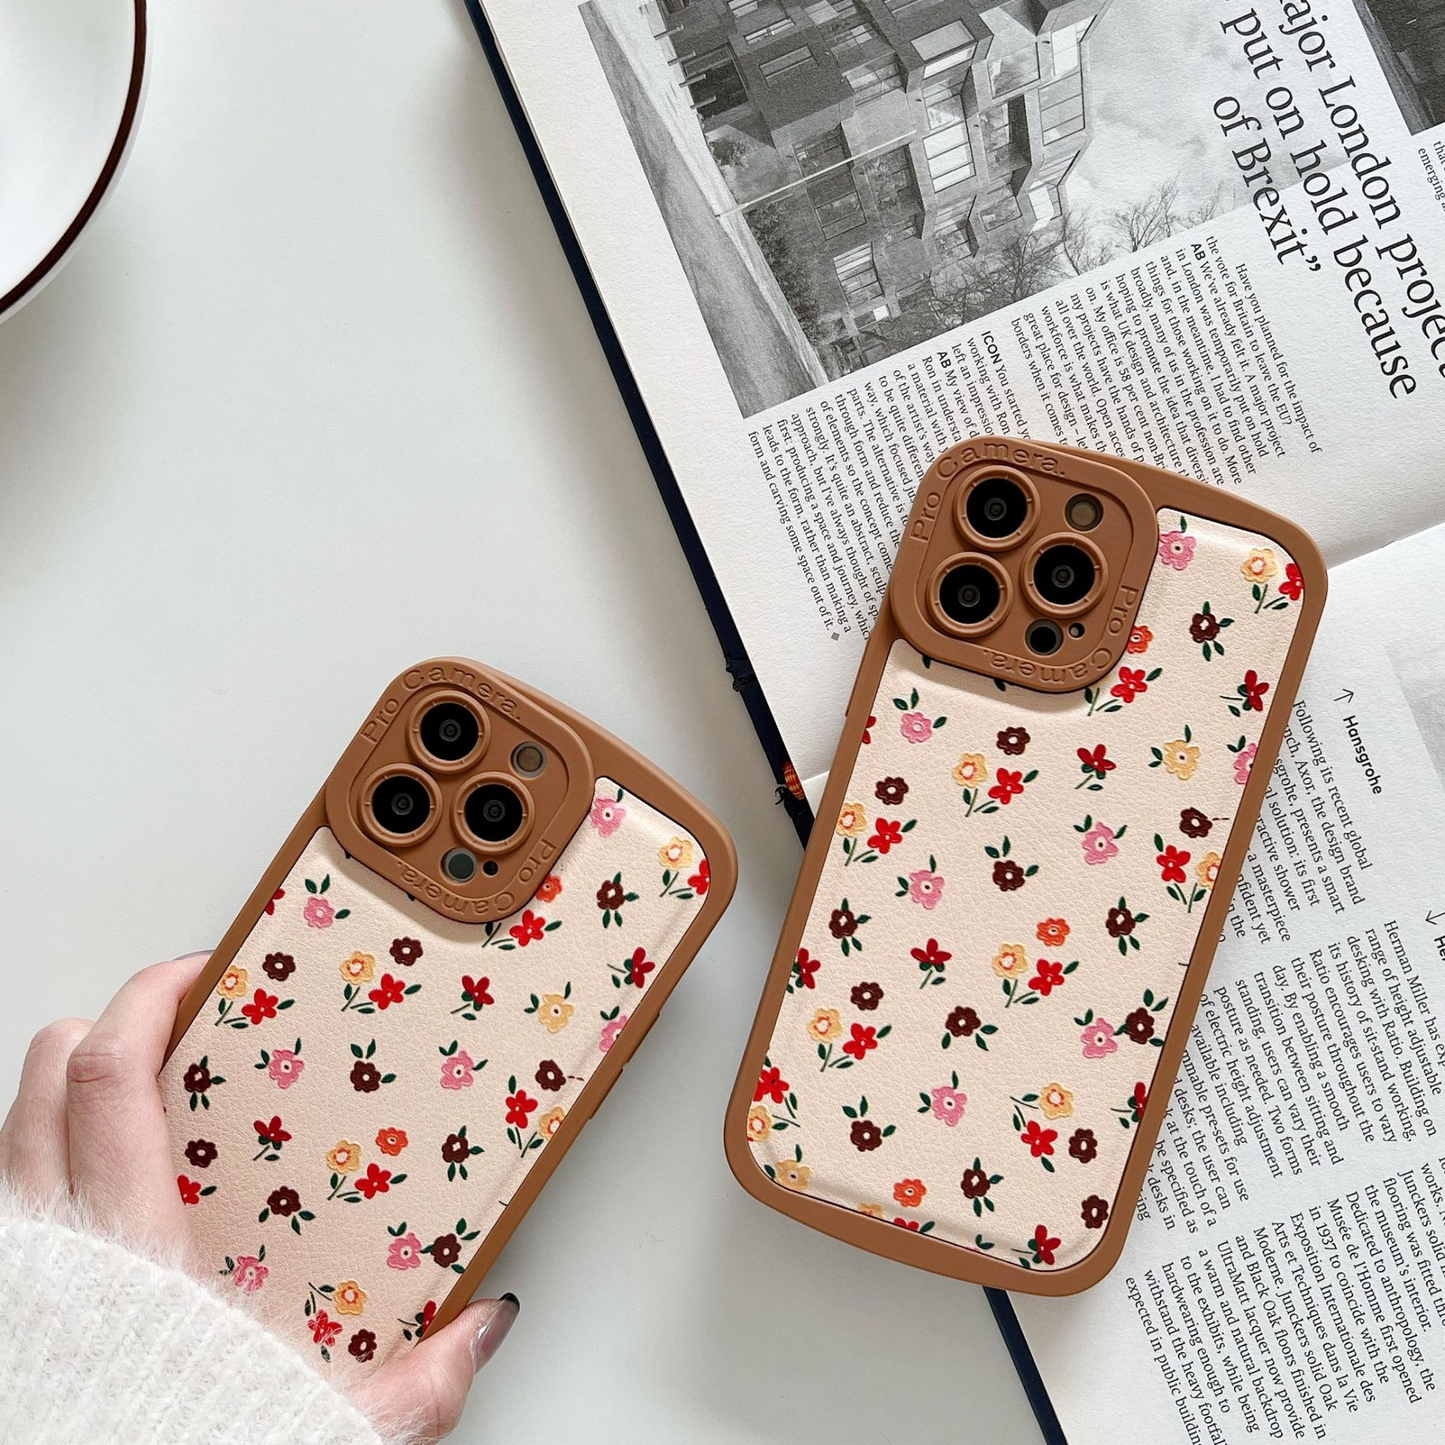 Floral Wallpaper Pattern iPhone Case